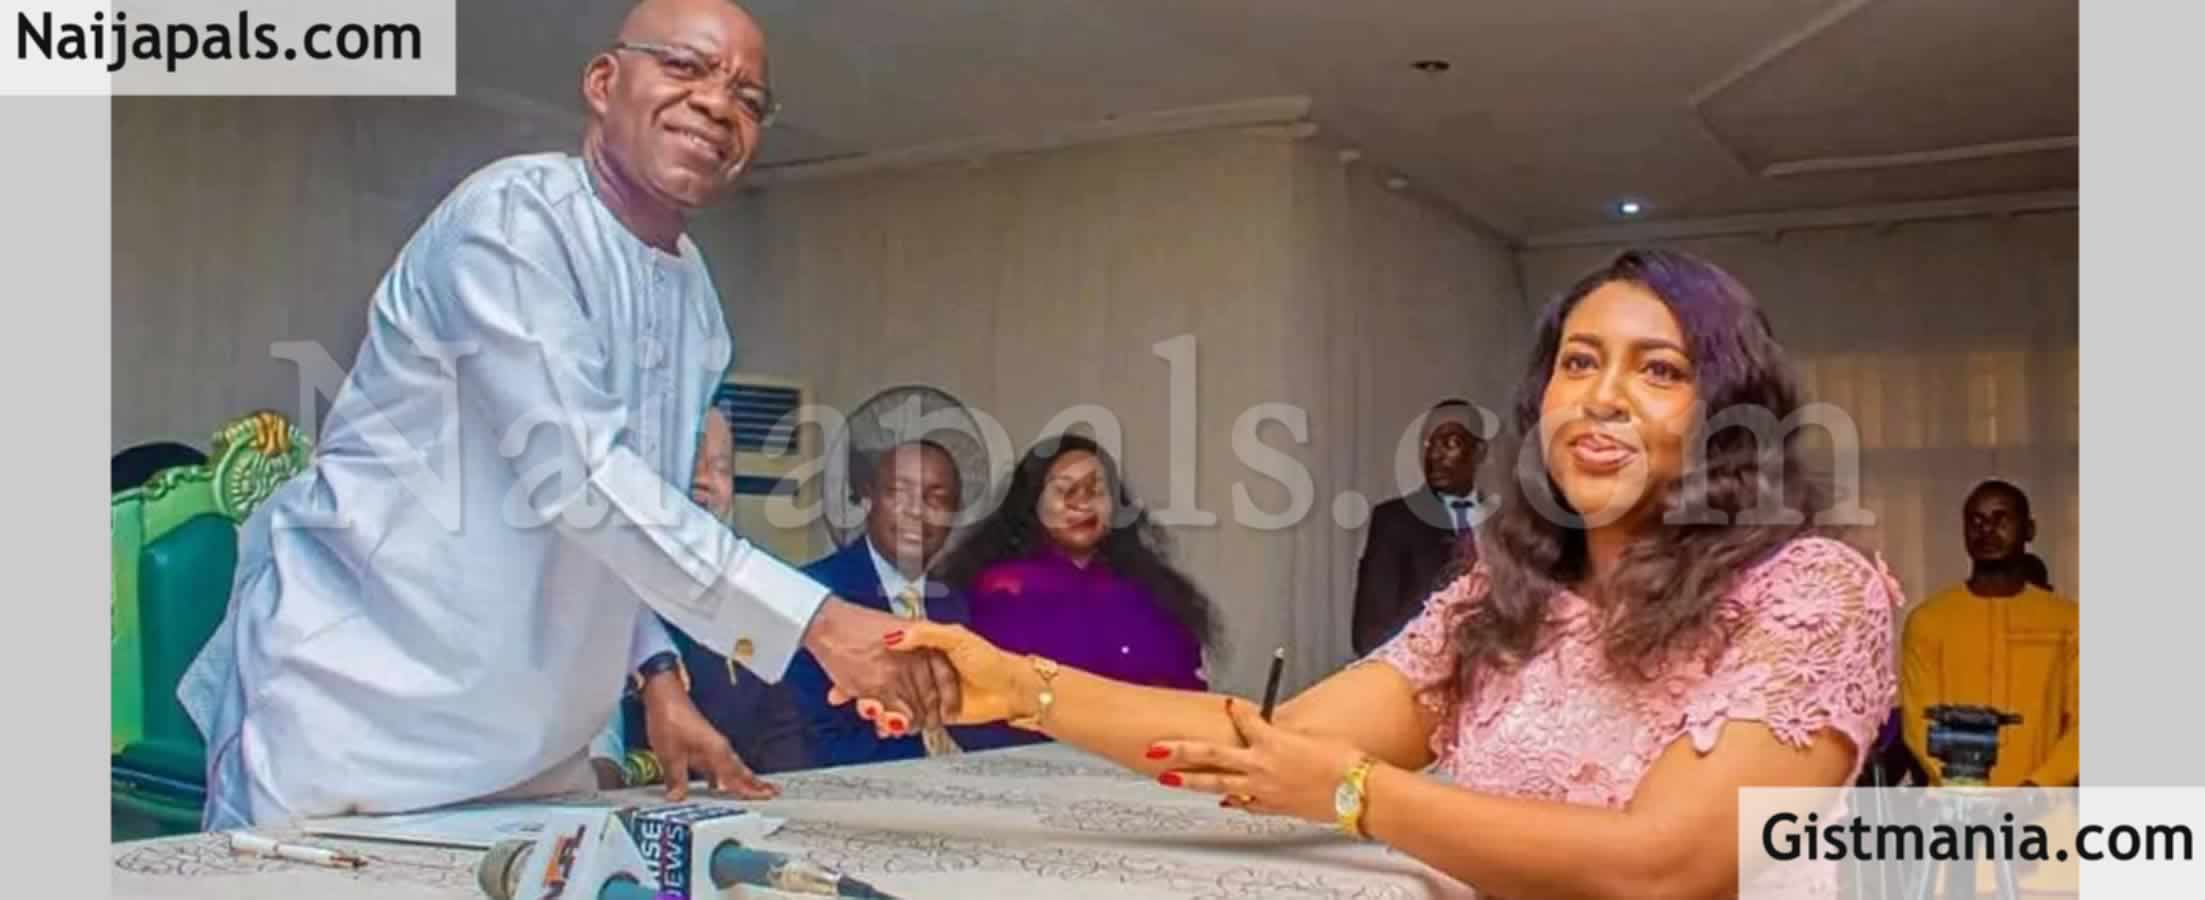 Abia Otti State Governor suspends communications On Dr. Ngozi Okoronkwo’s health over mismanagement of funds